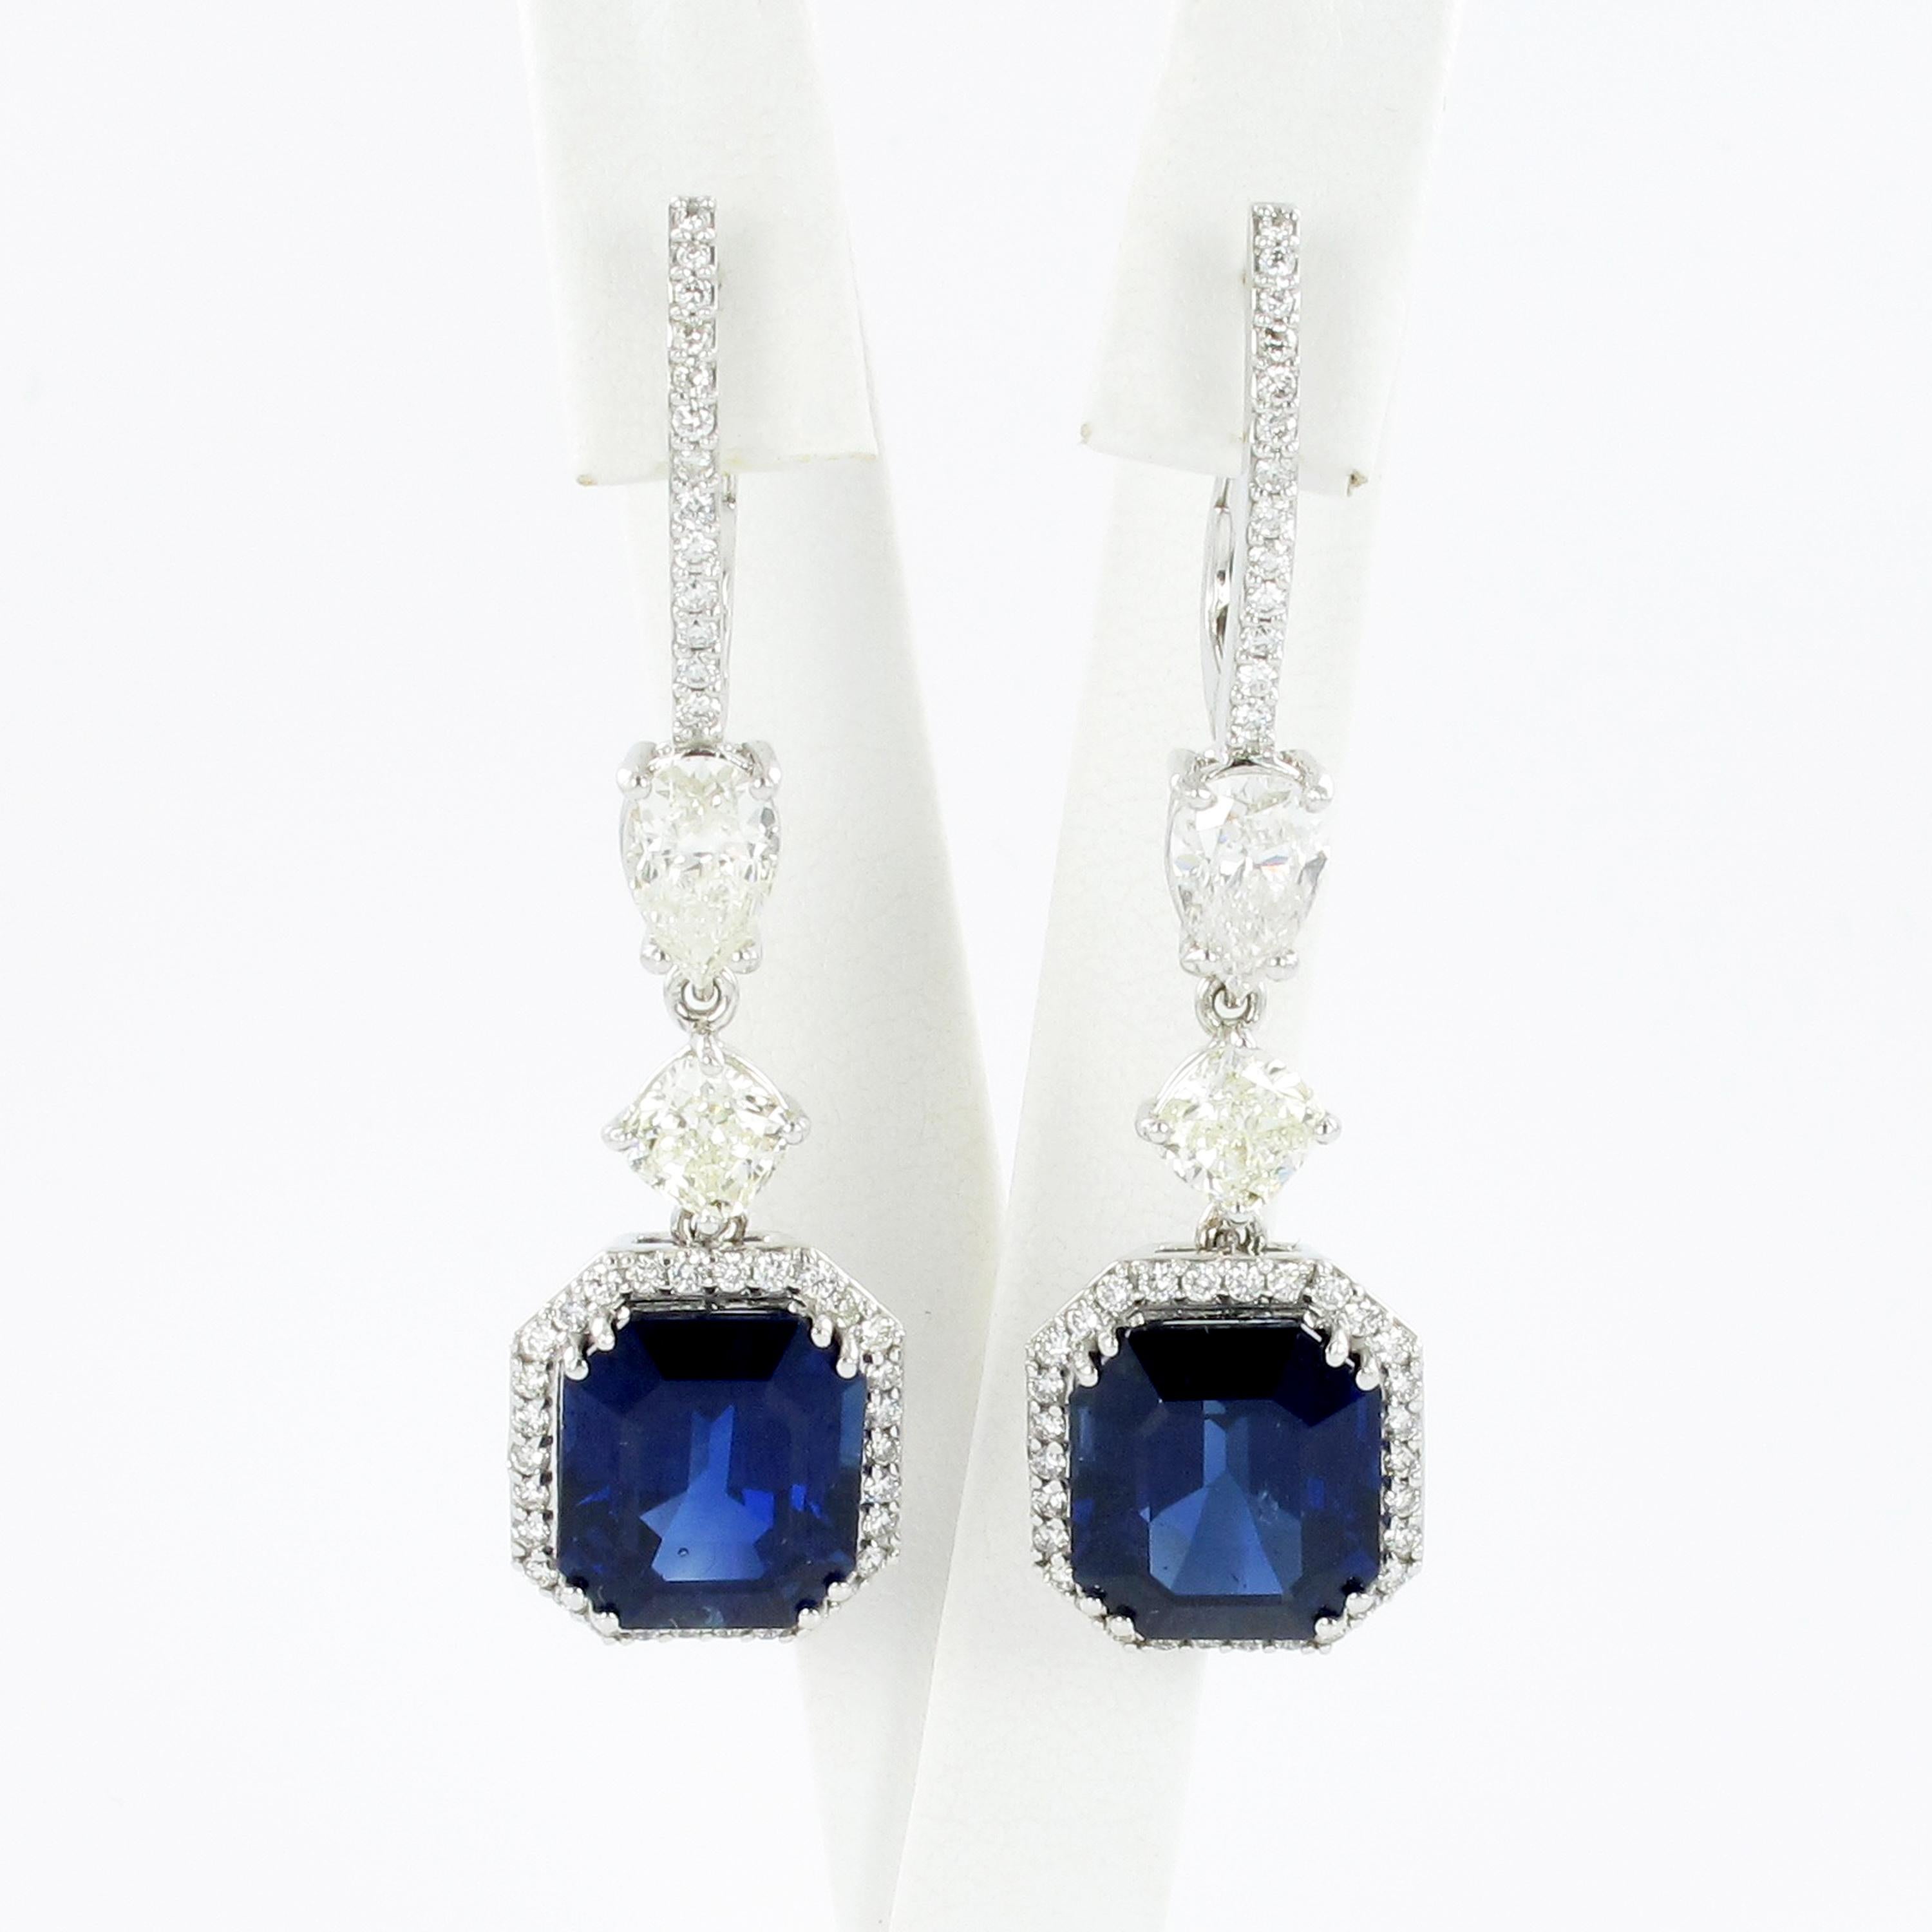 Elegant pair of ear hanger in white gold 750. Beautifully set in four double prongs with two blue sapphires totaling 12.50 ct. Further set with two pear shape diamonds and two cushion shape diamonds totaling 2.52 ct all together. The 86 smaller